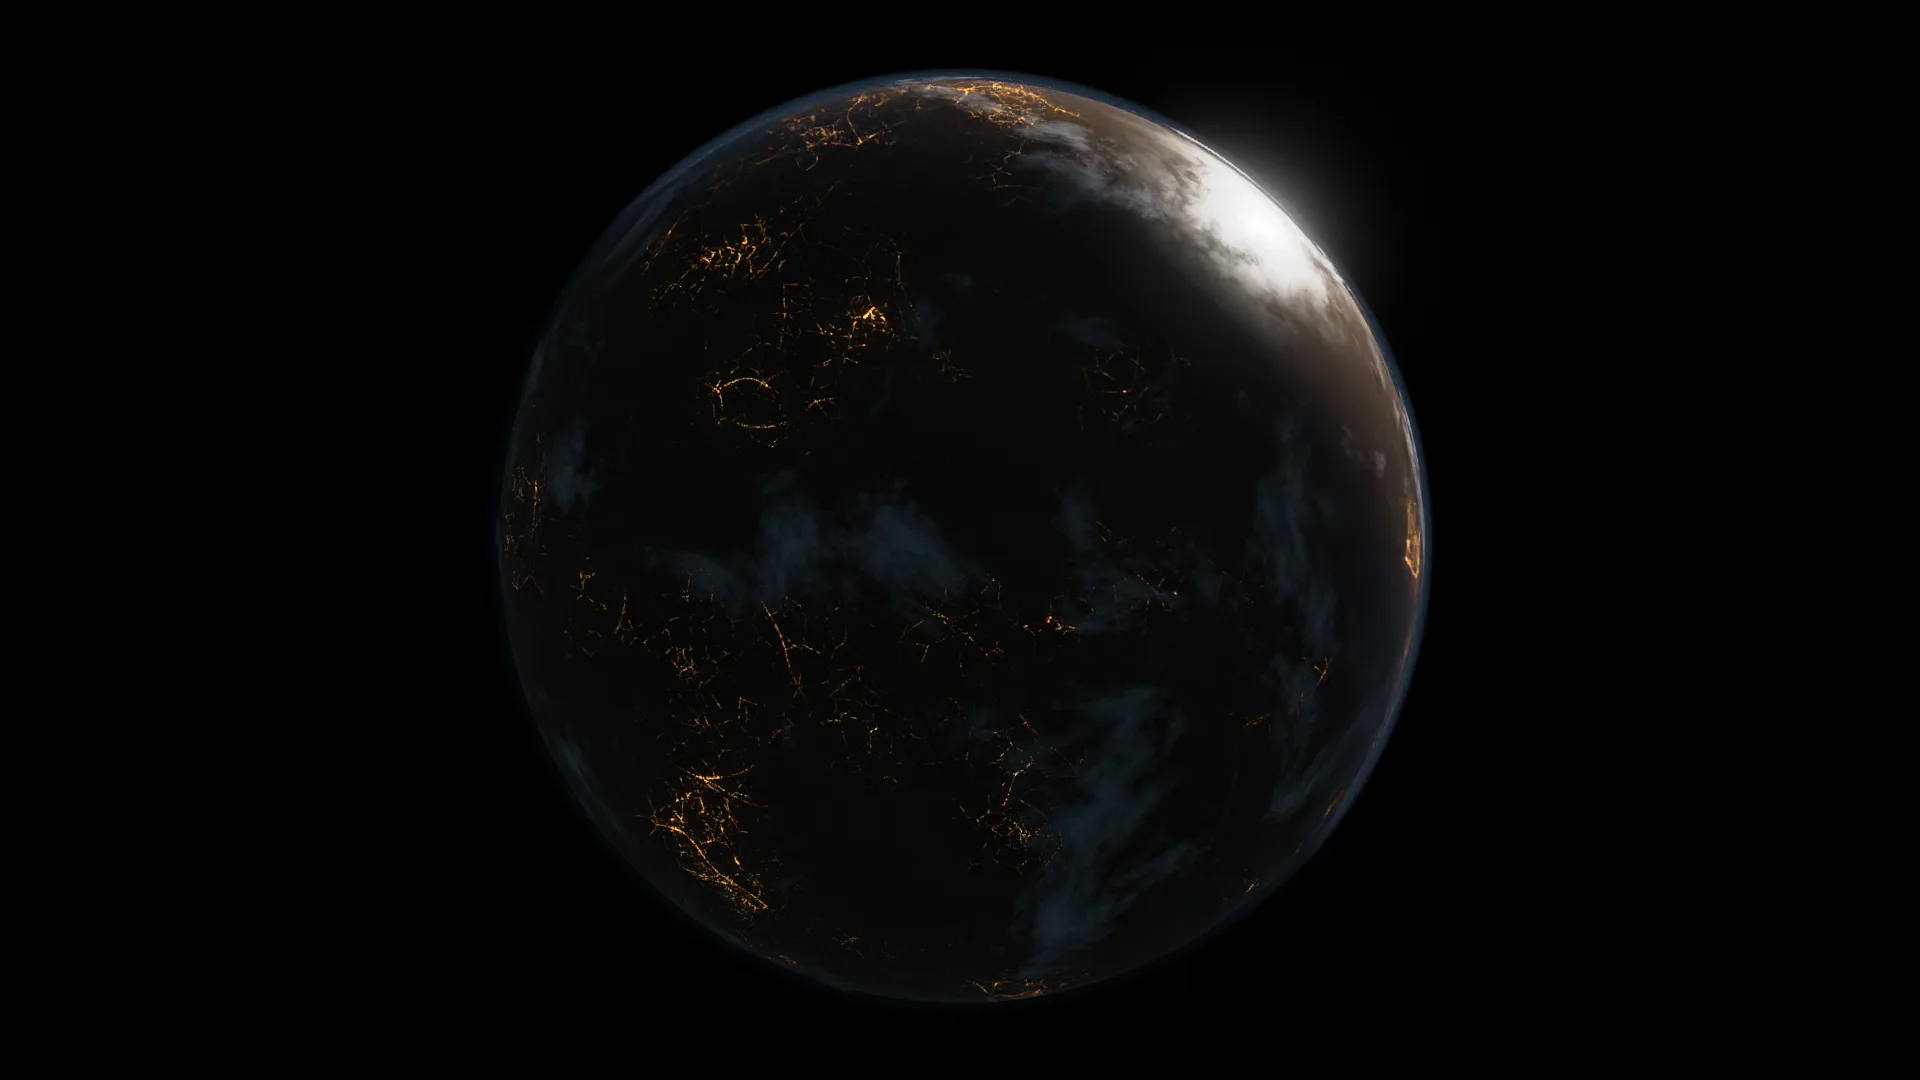 Procedurally Generated Planets in Blender